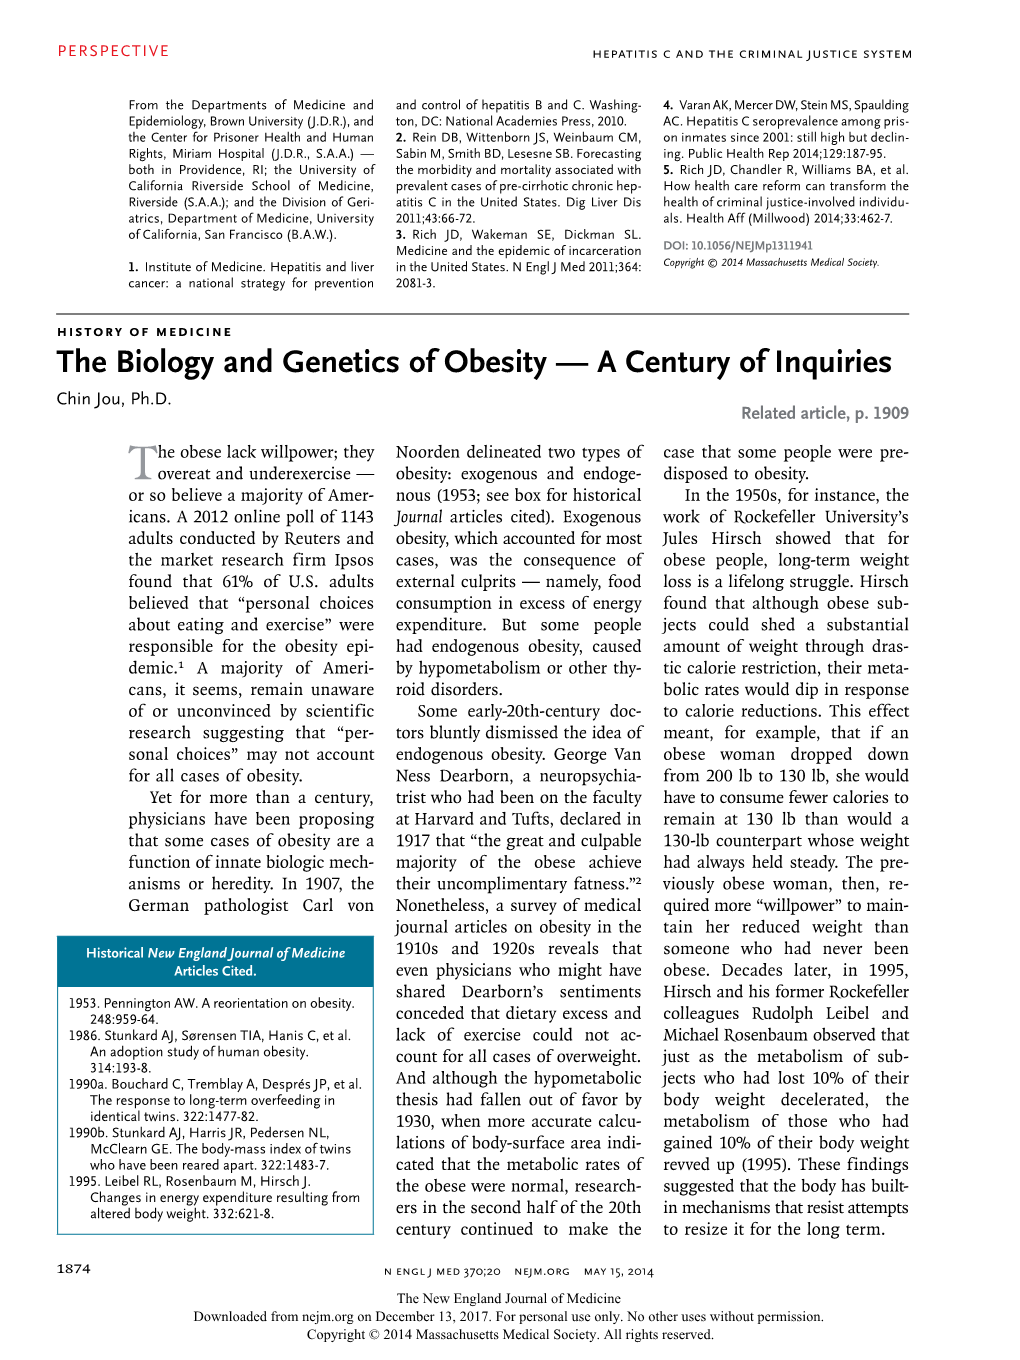 The Biology and Genetics of Obesity — a Century of Inquiries Chin Jou, Ph.D